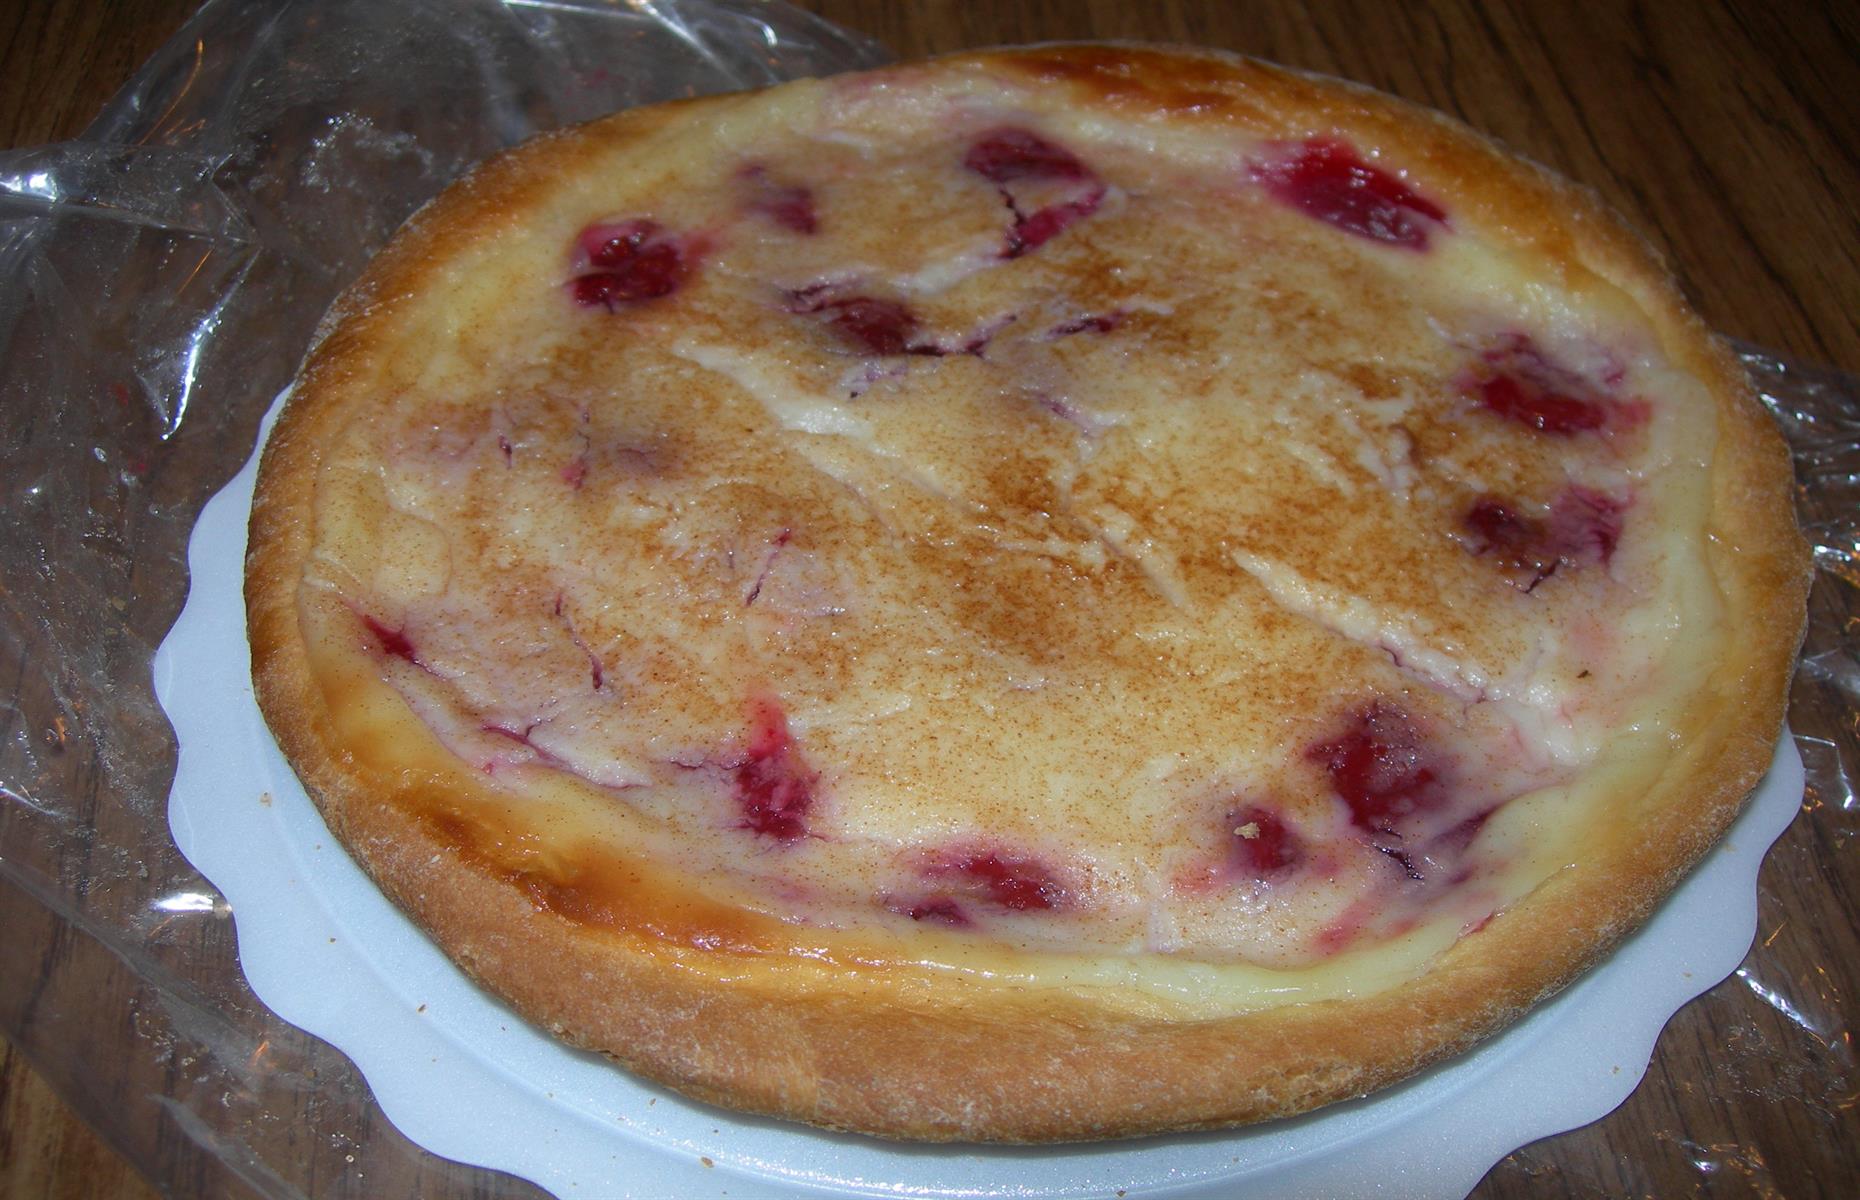 <p>This variety, often referred to as a dough pie, was <a href="https://statesymbolsusa.org/symbol-official-item/south-dakota/state-food-agriculture-symbol/kuchen">named the official state dessert</a> in 2000 and is based on recipes <a href="https://www.southdakotamagazine.com/cooking-kuchen">introduced by German settlers in the 1880s</a>. Its heritage is celebrated at festivals across the state, while many bakeries still specialize in kuchen. Other popular styles of kuchen include one with a cake-like crust and apple filling, pastries with cinnamon and sugar, and cheesecake-style with cherries and custard.</p>